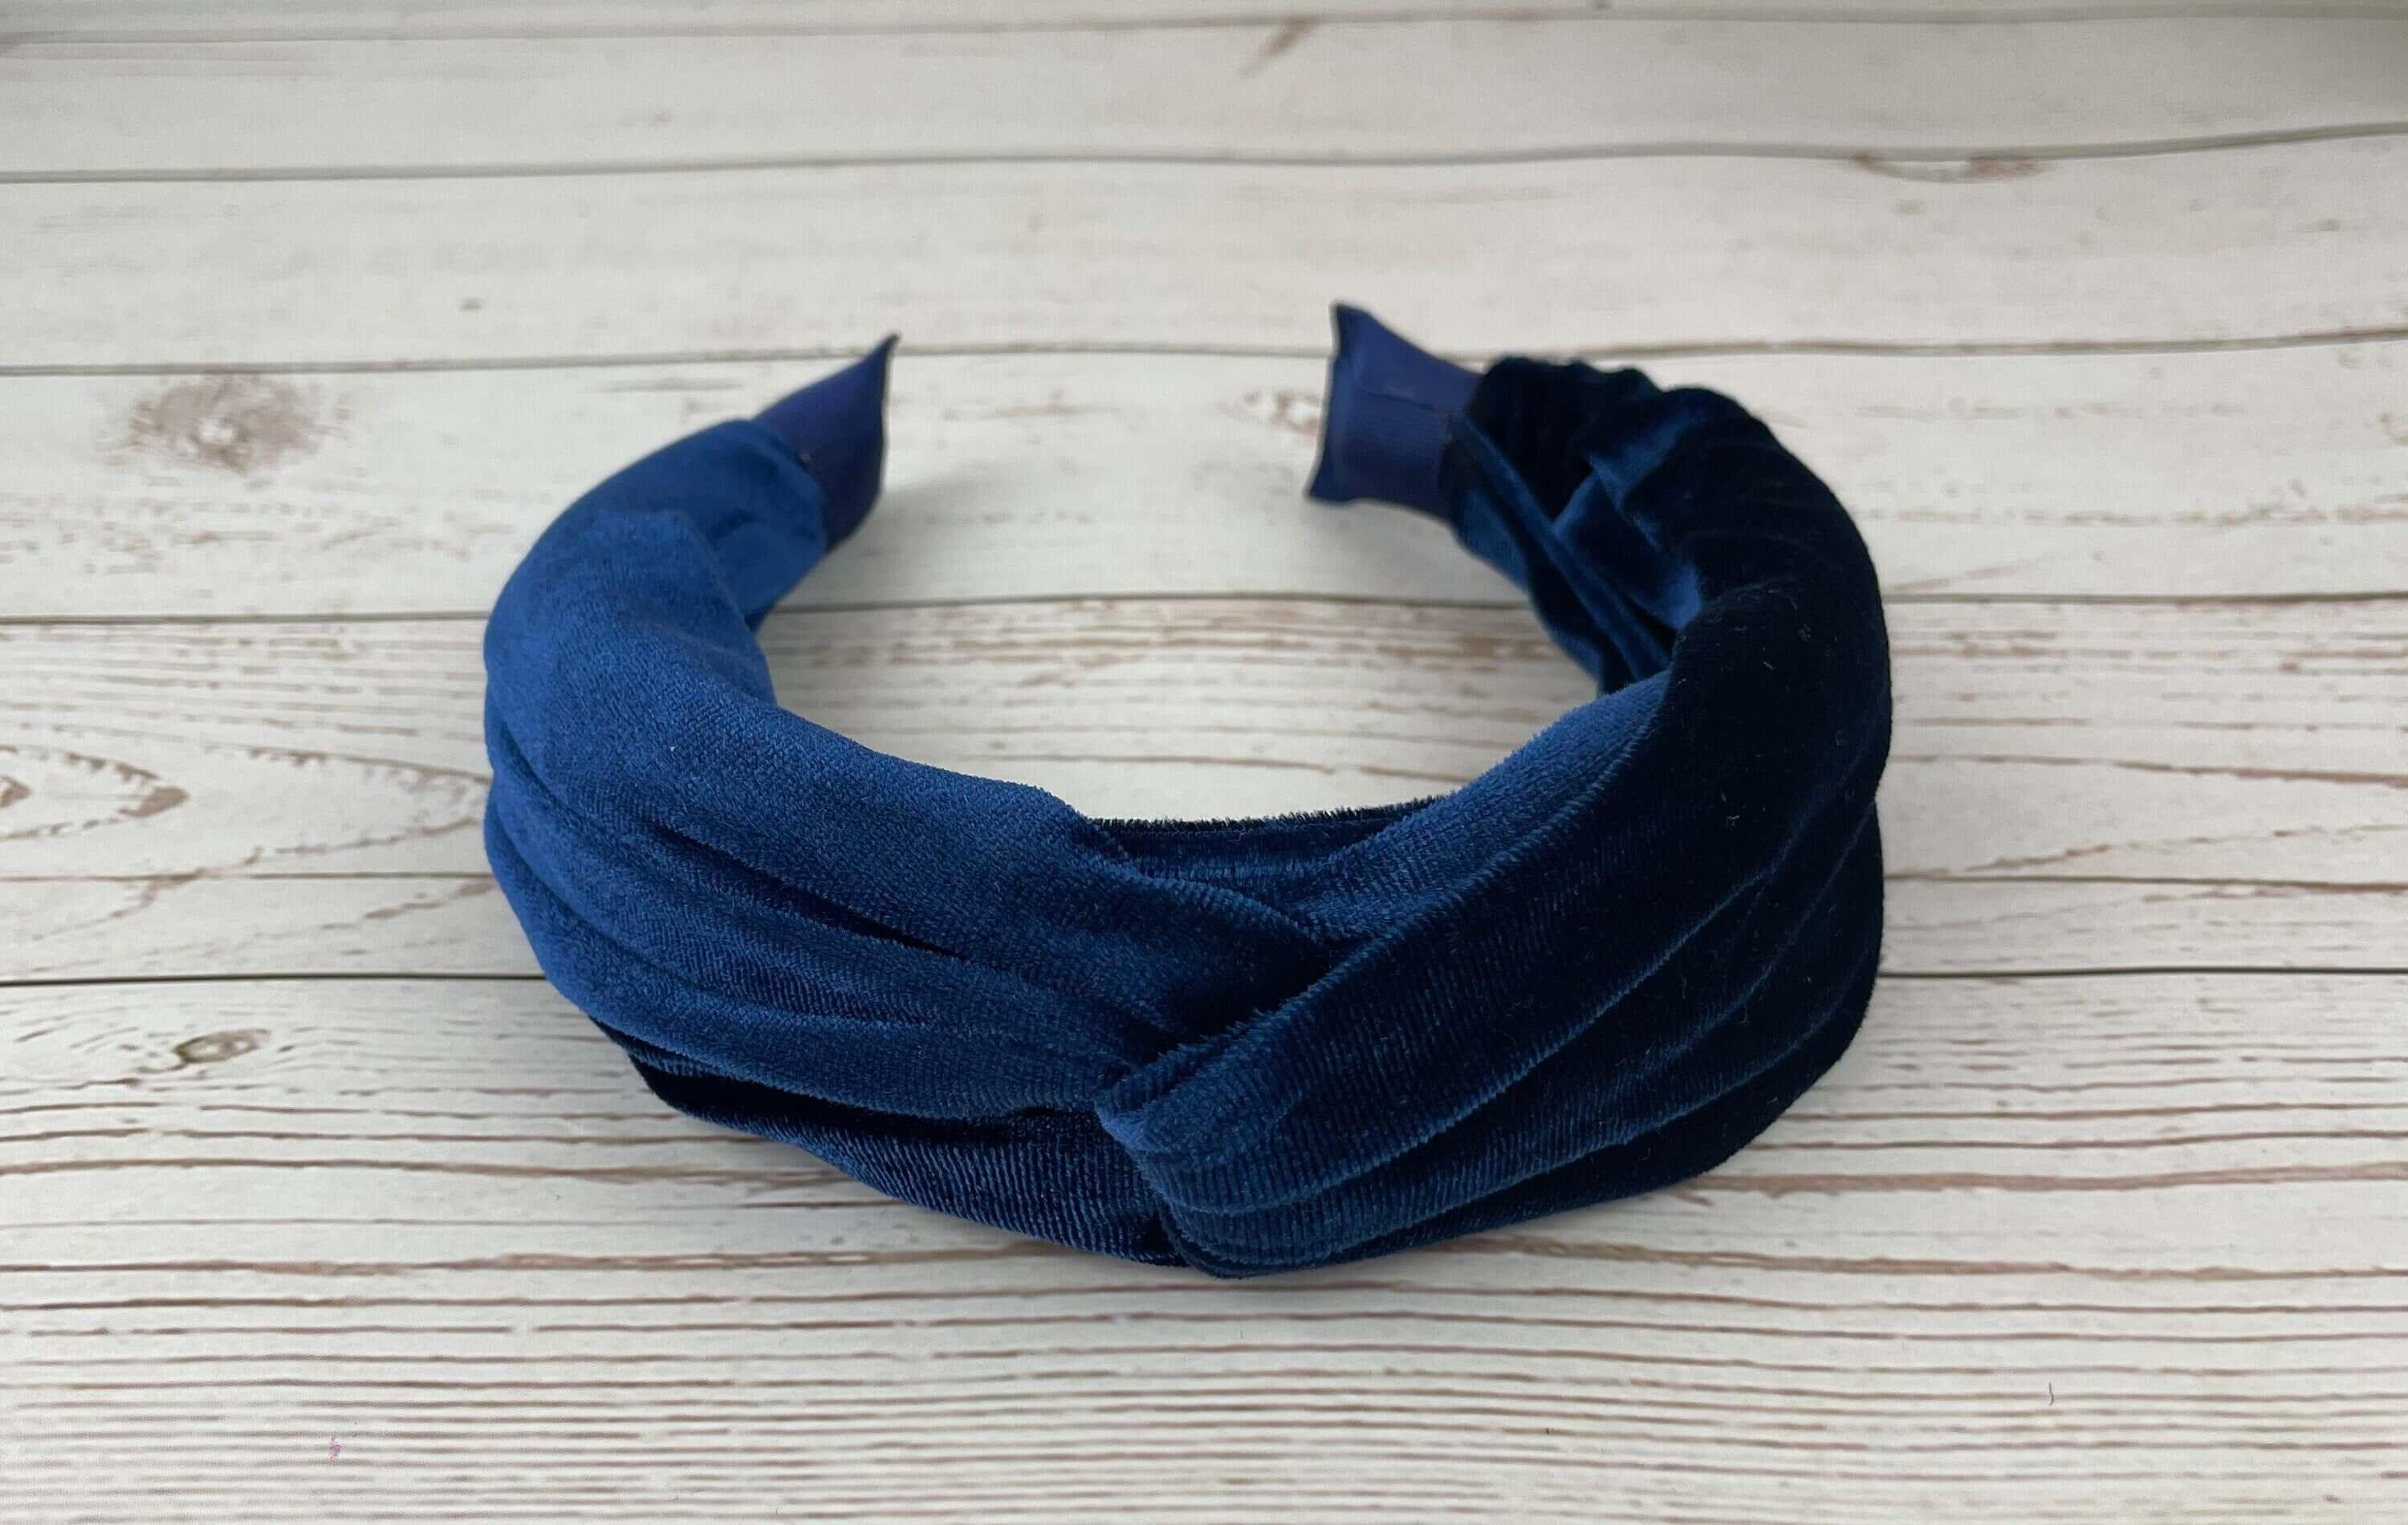 Stylish Parliament Blue Knotted Velvet Headband - Handmade Dark Navy Hairband for Women, Fashionable and Comfortable Accessory without Padding available at Moyoni Design